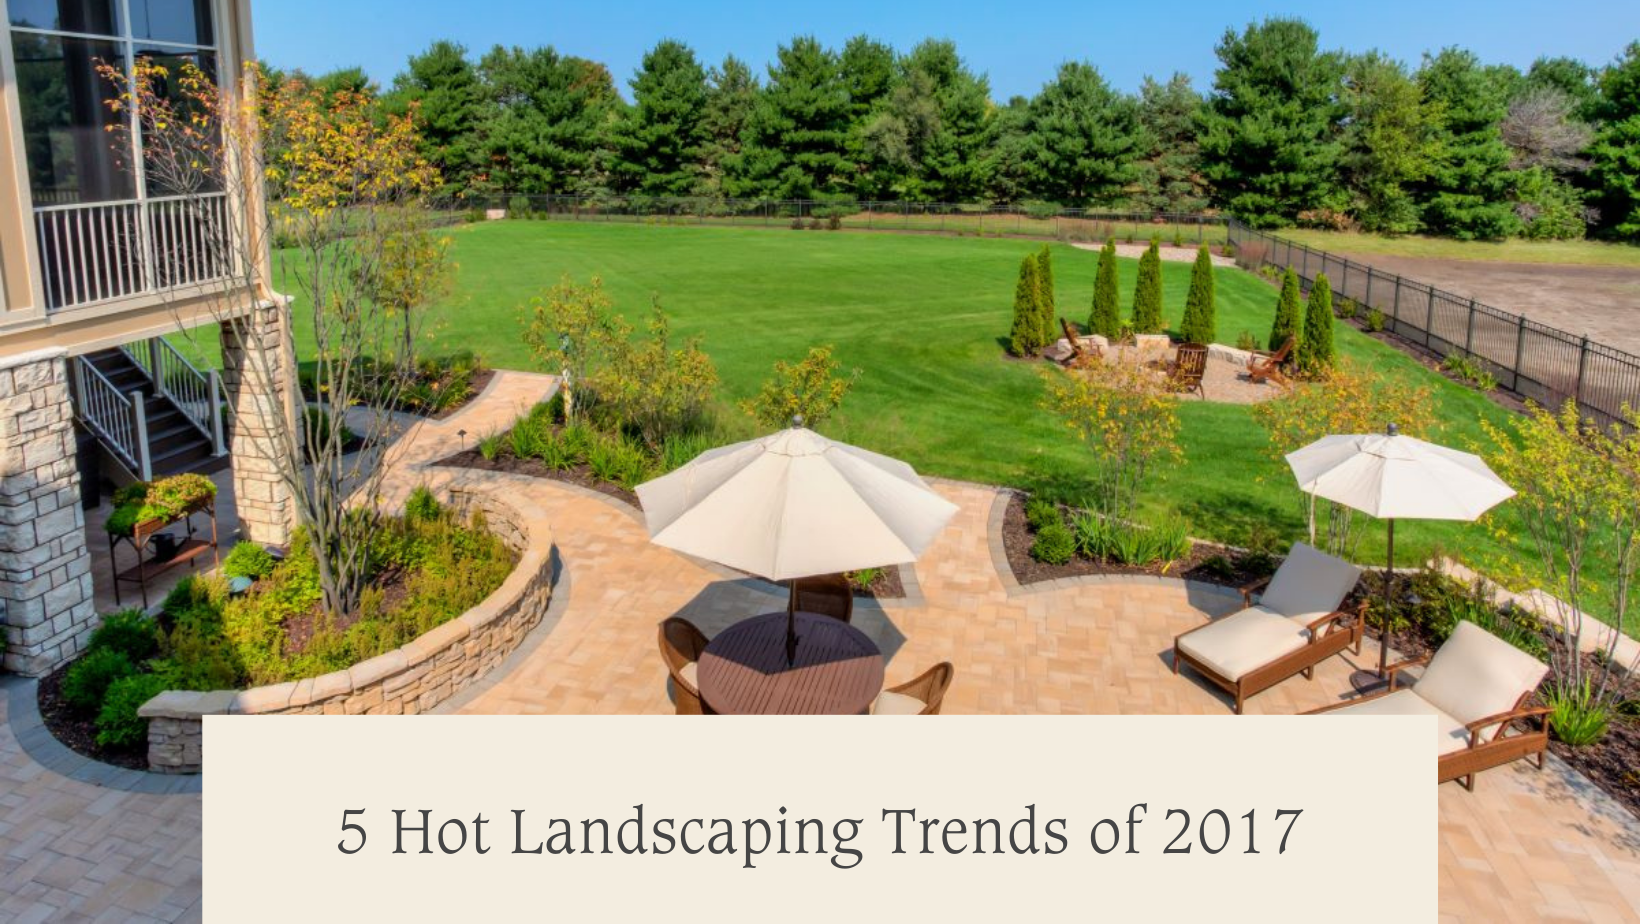 5 Hot Landscaping Trends for 2017